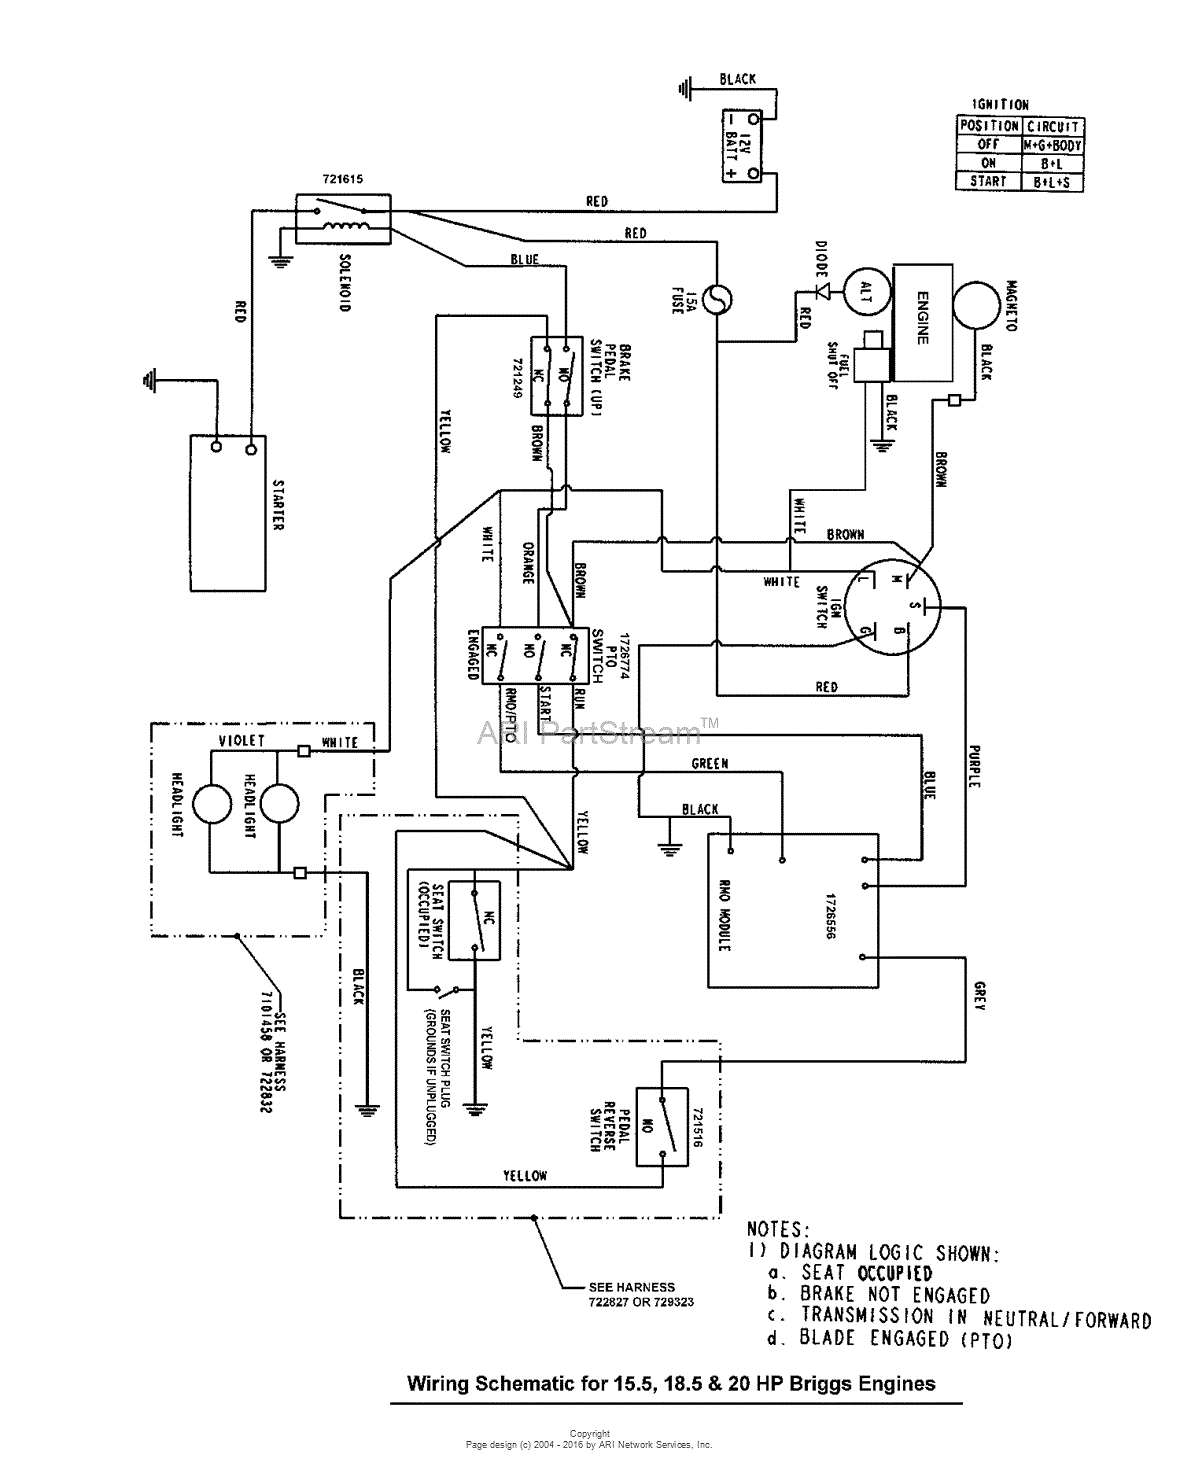 Wiring Diagram For Briggs And Stratton 18 Hp